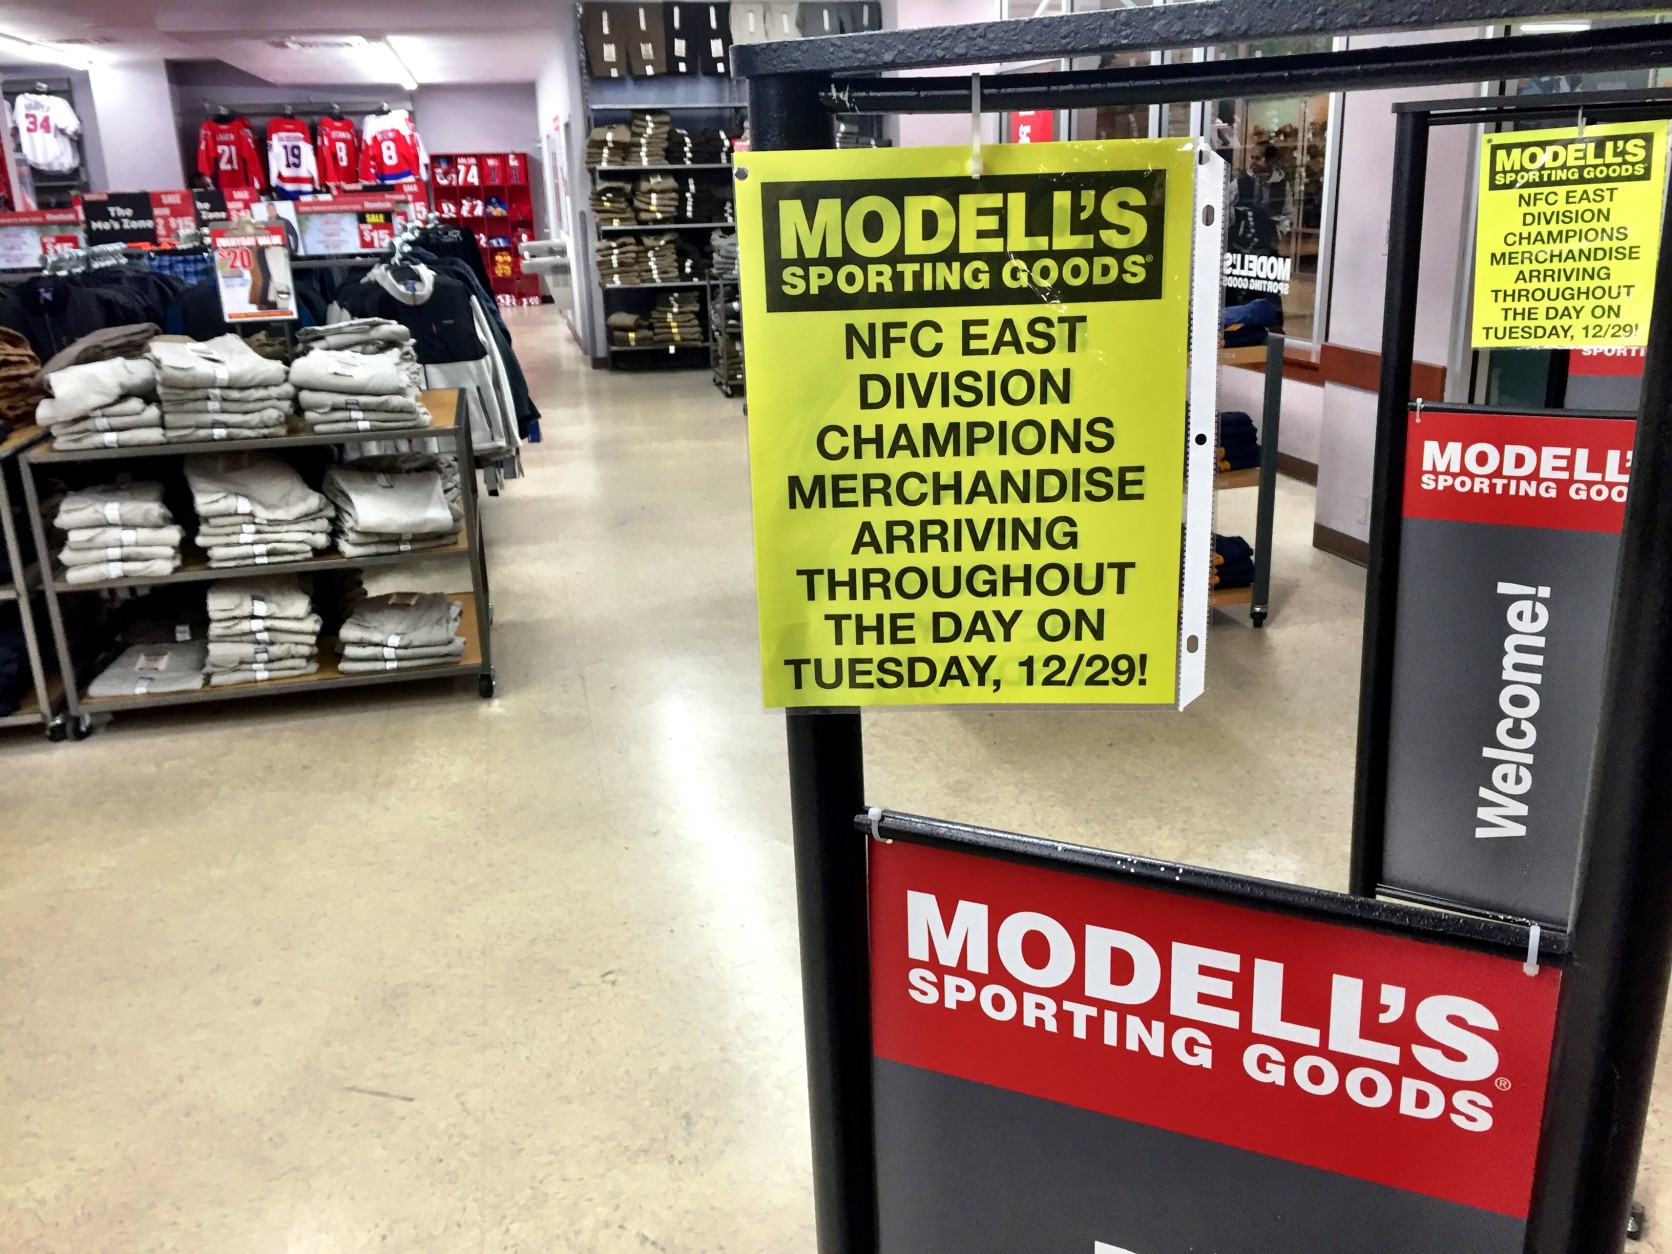 "It's the first time in three years, so there's a lot of excitement here," said Mark Siegel, general manager of the Modells sporting goods store in Pentagon Center. Siegel says he and his employees have been fielding phone calls in the past 24 hours, after it was announced playoff merchandise would be delivered Tuesday. (WTOP/Neal Augenstein)